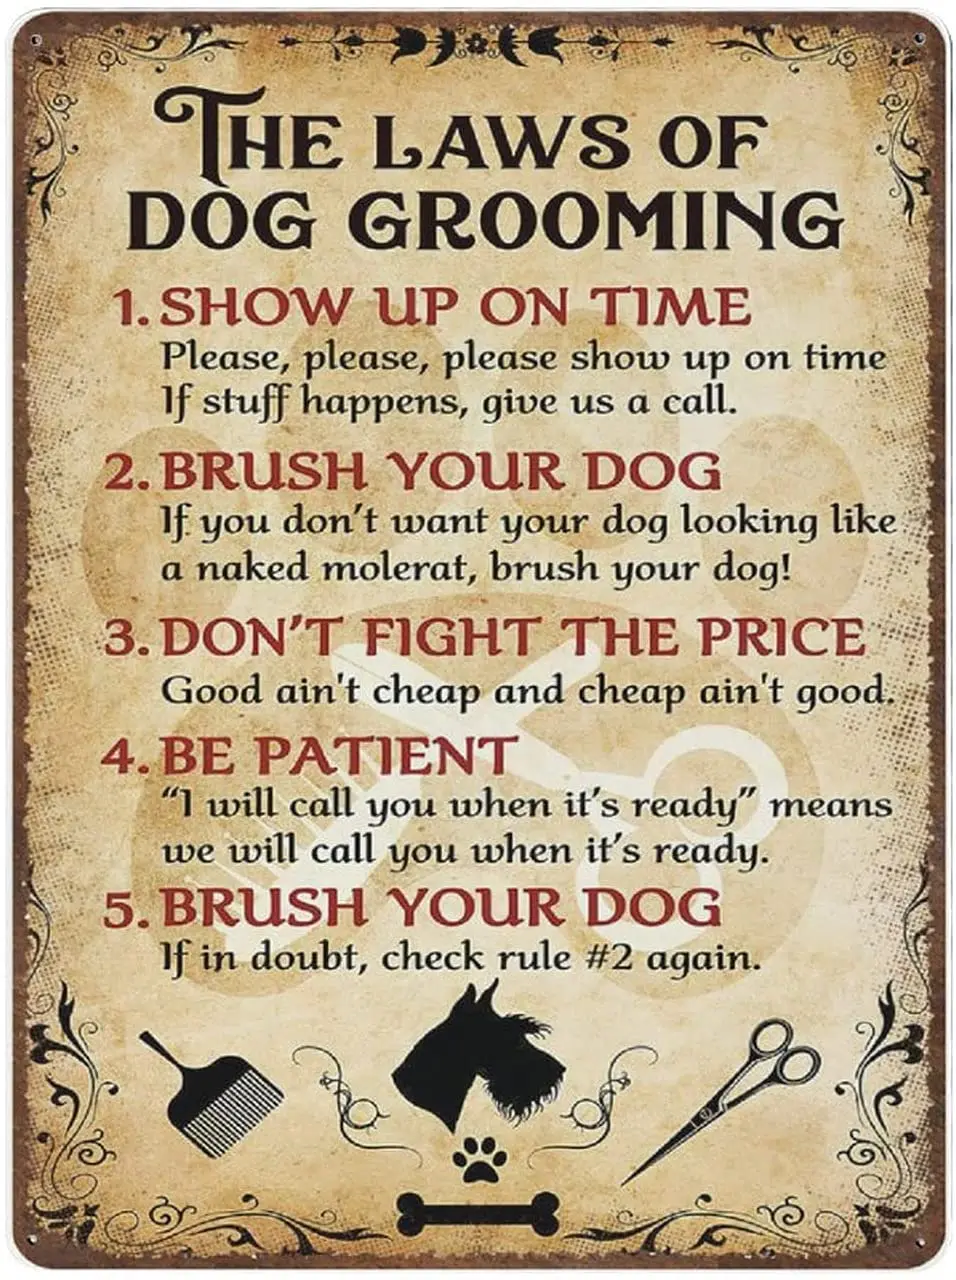 

New Retro Metal Novelty Poster Iron Painting The Laws Of Dog Grooming Dog Groomer Tin Sign Gift For Dog Groomer Wall Decoration